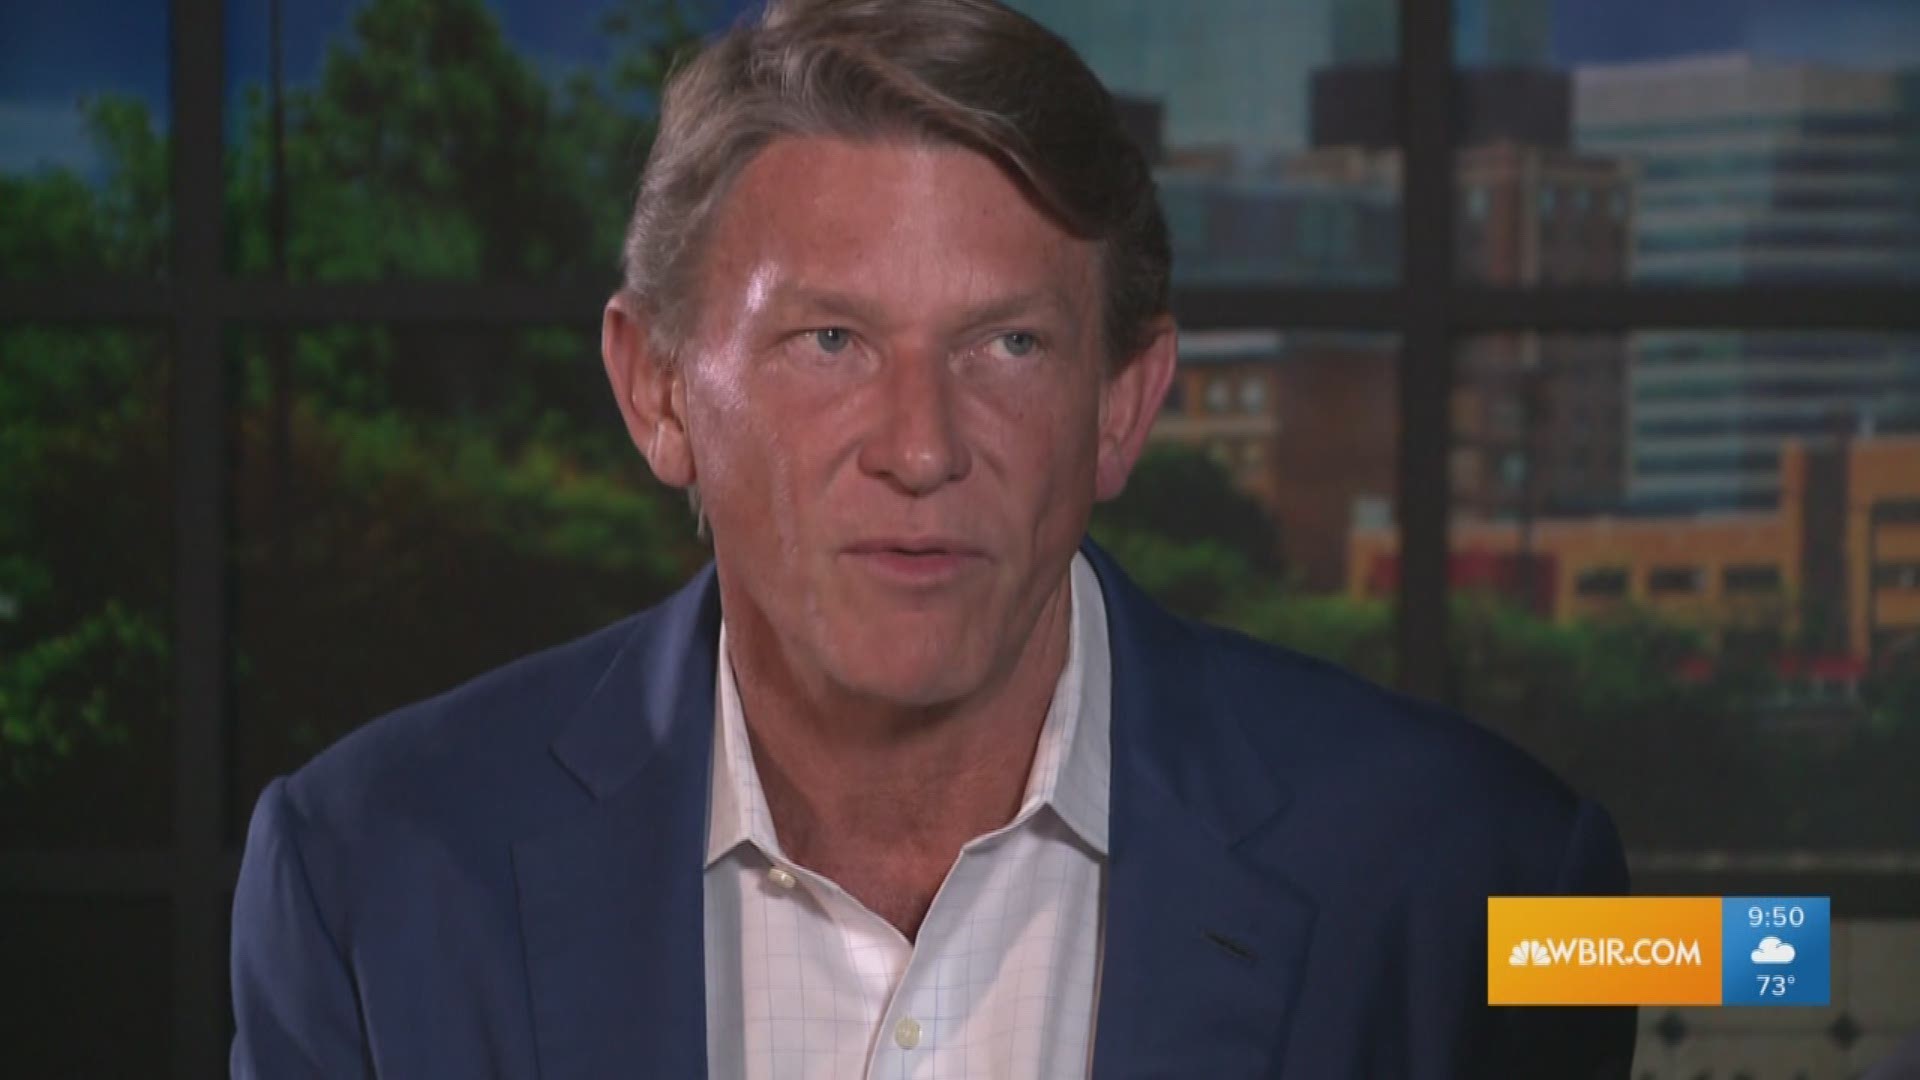 Entrepreneur and former gubernatorial candidate Randy Boyd talks about life after the campaign.